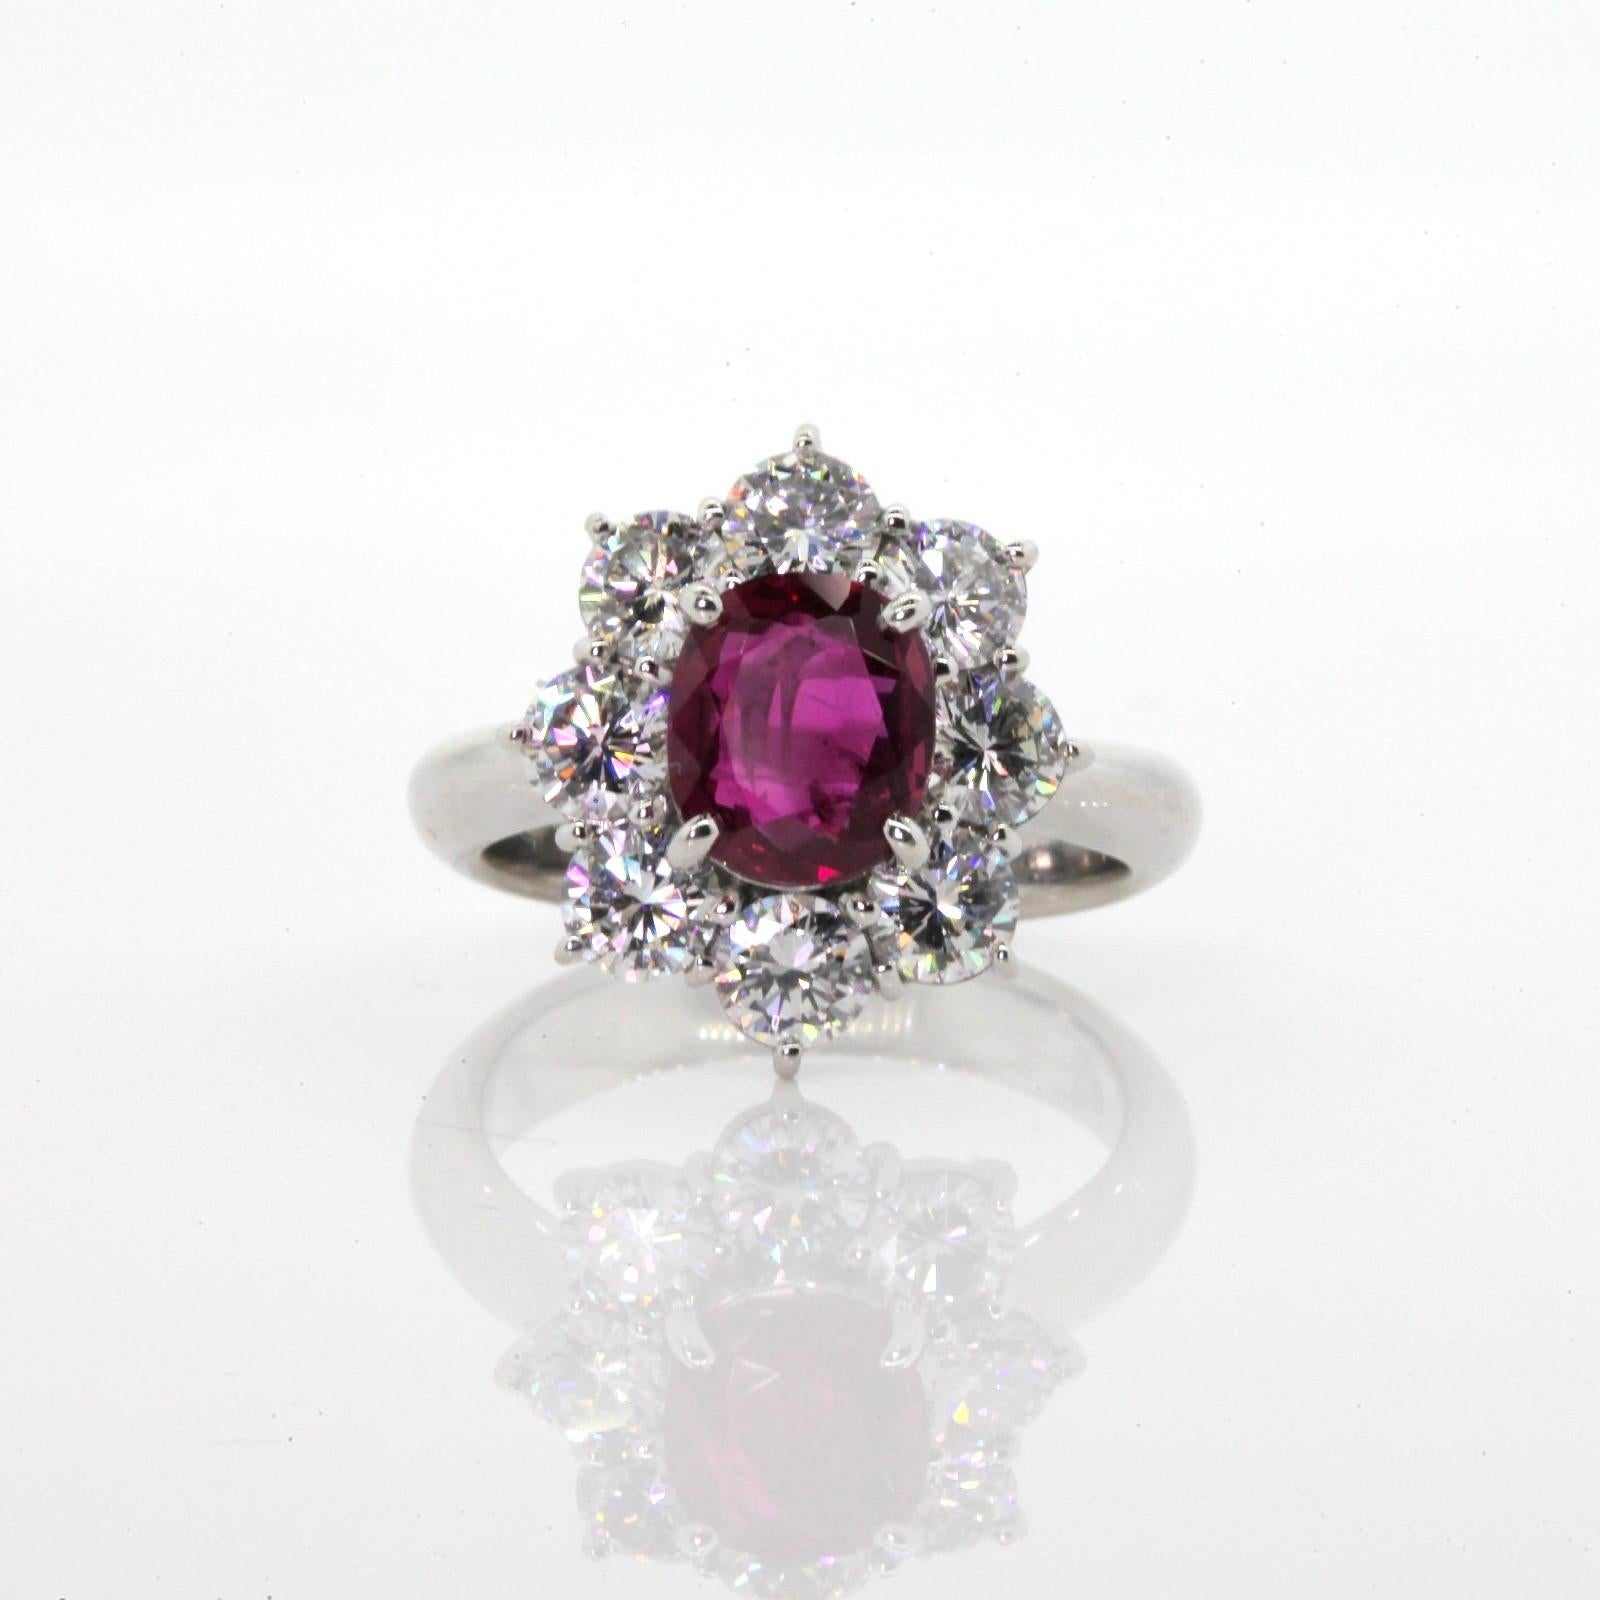 A beautiful platinum cluster ring centering a 1.82 carat G.I.A. certified Cushion cut Red Ruby.  The Ruby of Thai origins is surrounded by eight fiery Round Brilliant Cut Diamonds all weighing 1,89 carat of H color - VS clarity.  A Most Impressive!